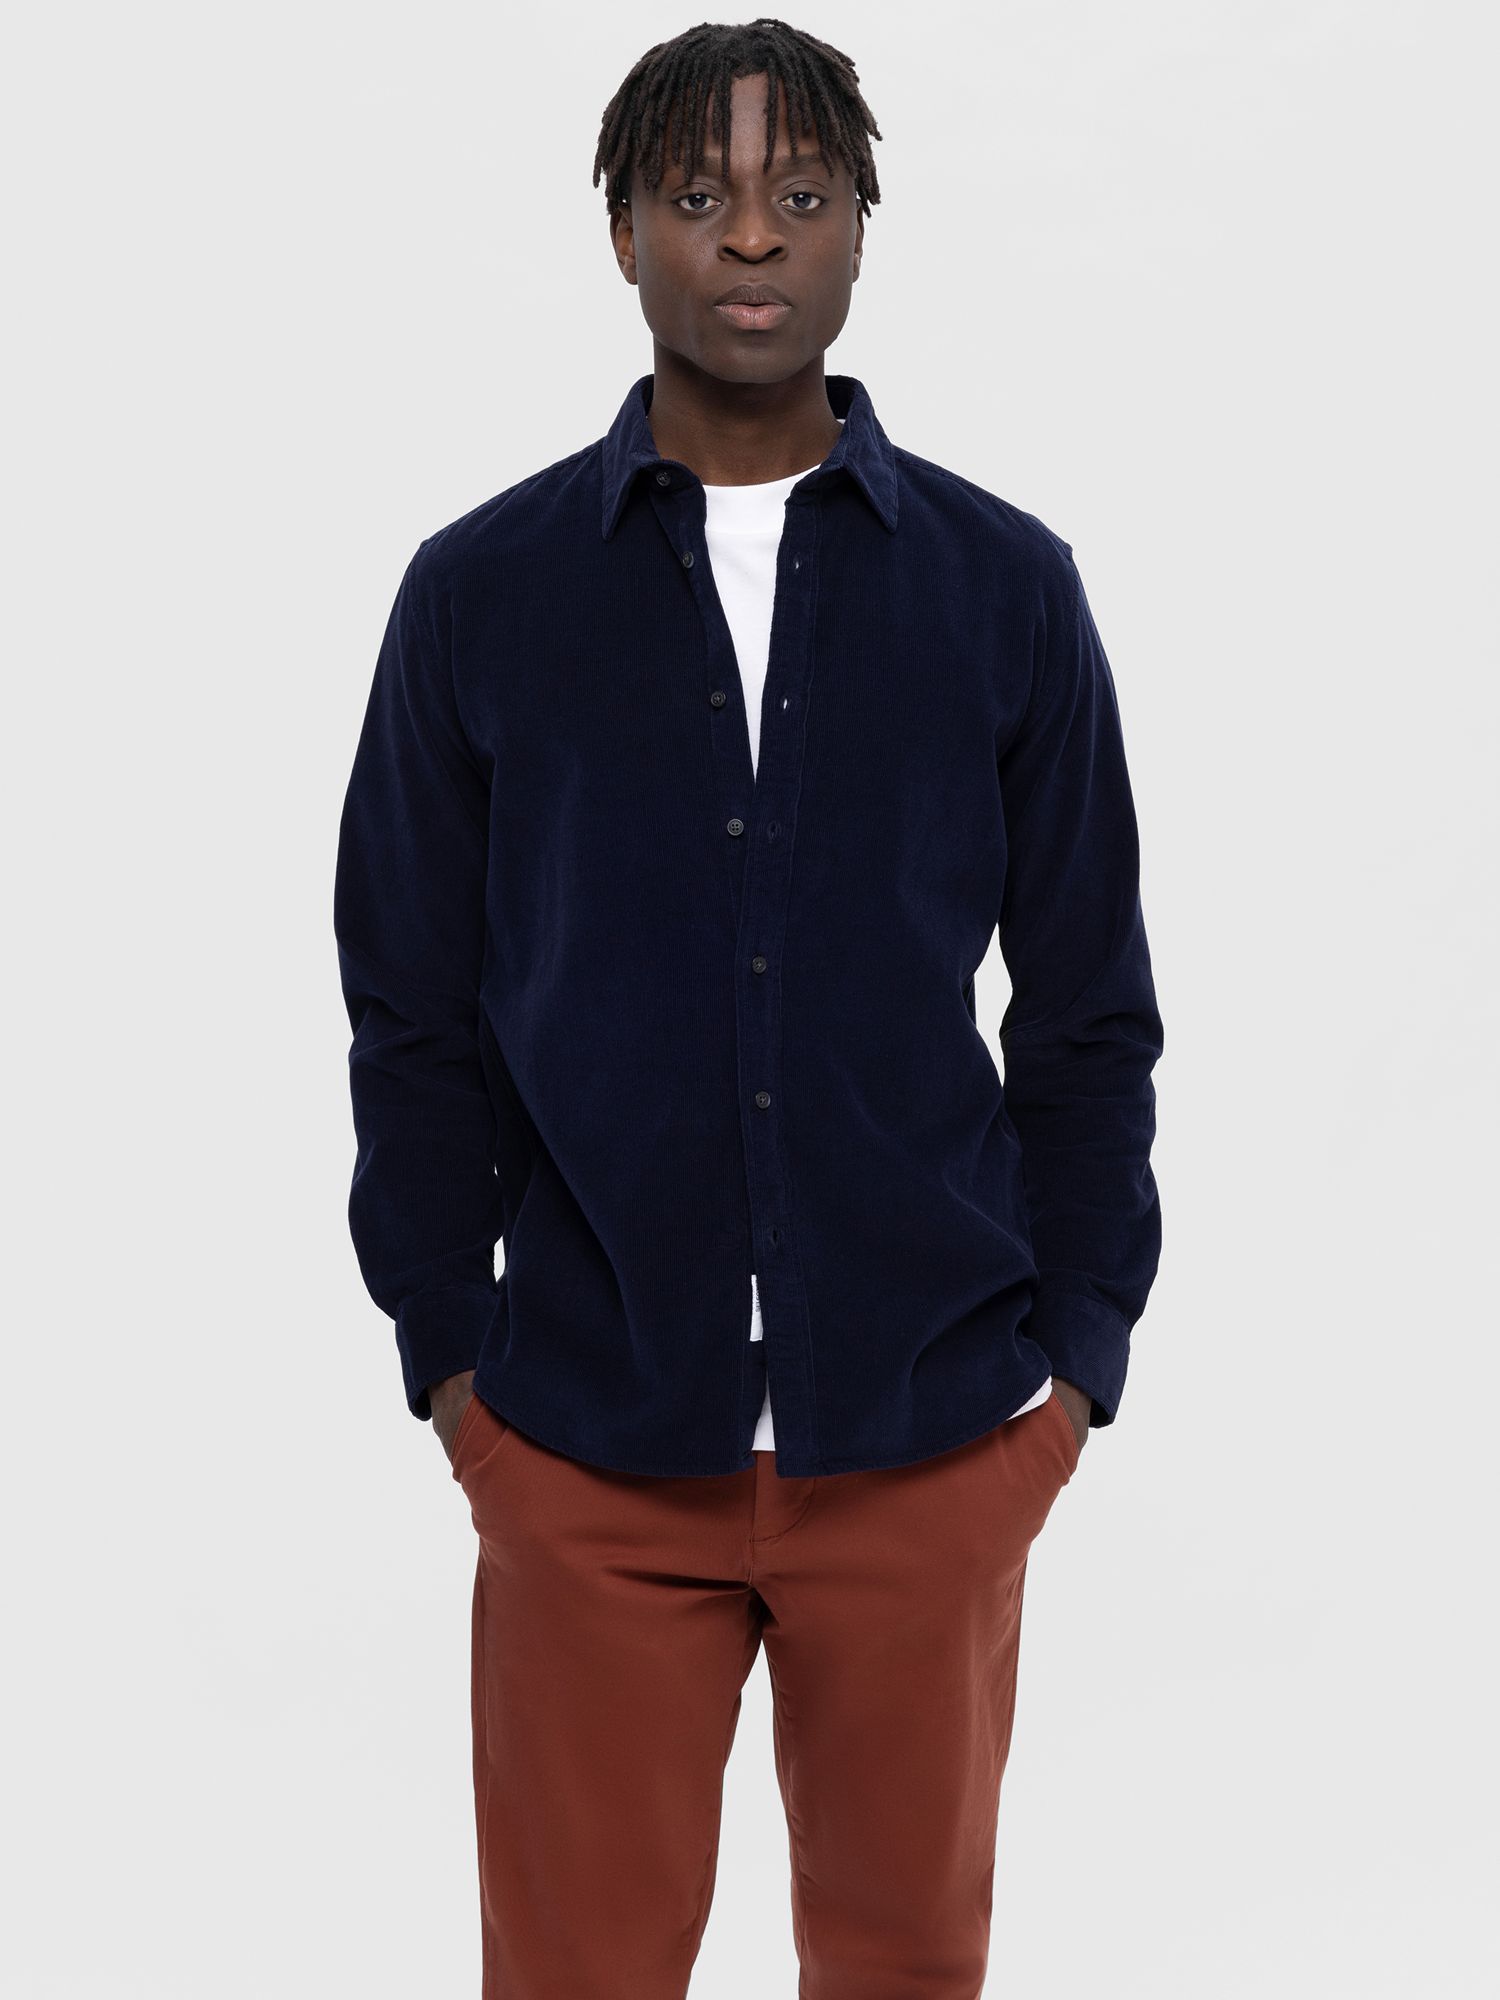 SELECTED HOMME Owen Recycled Cotton Corduroy Shirt, Navy Blazer, M